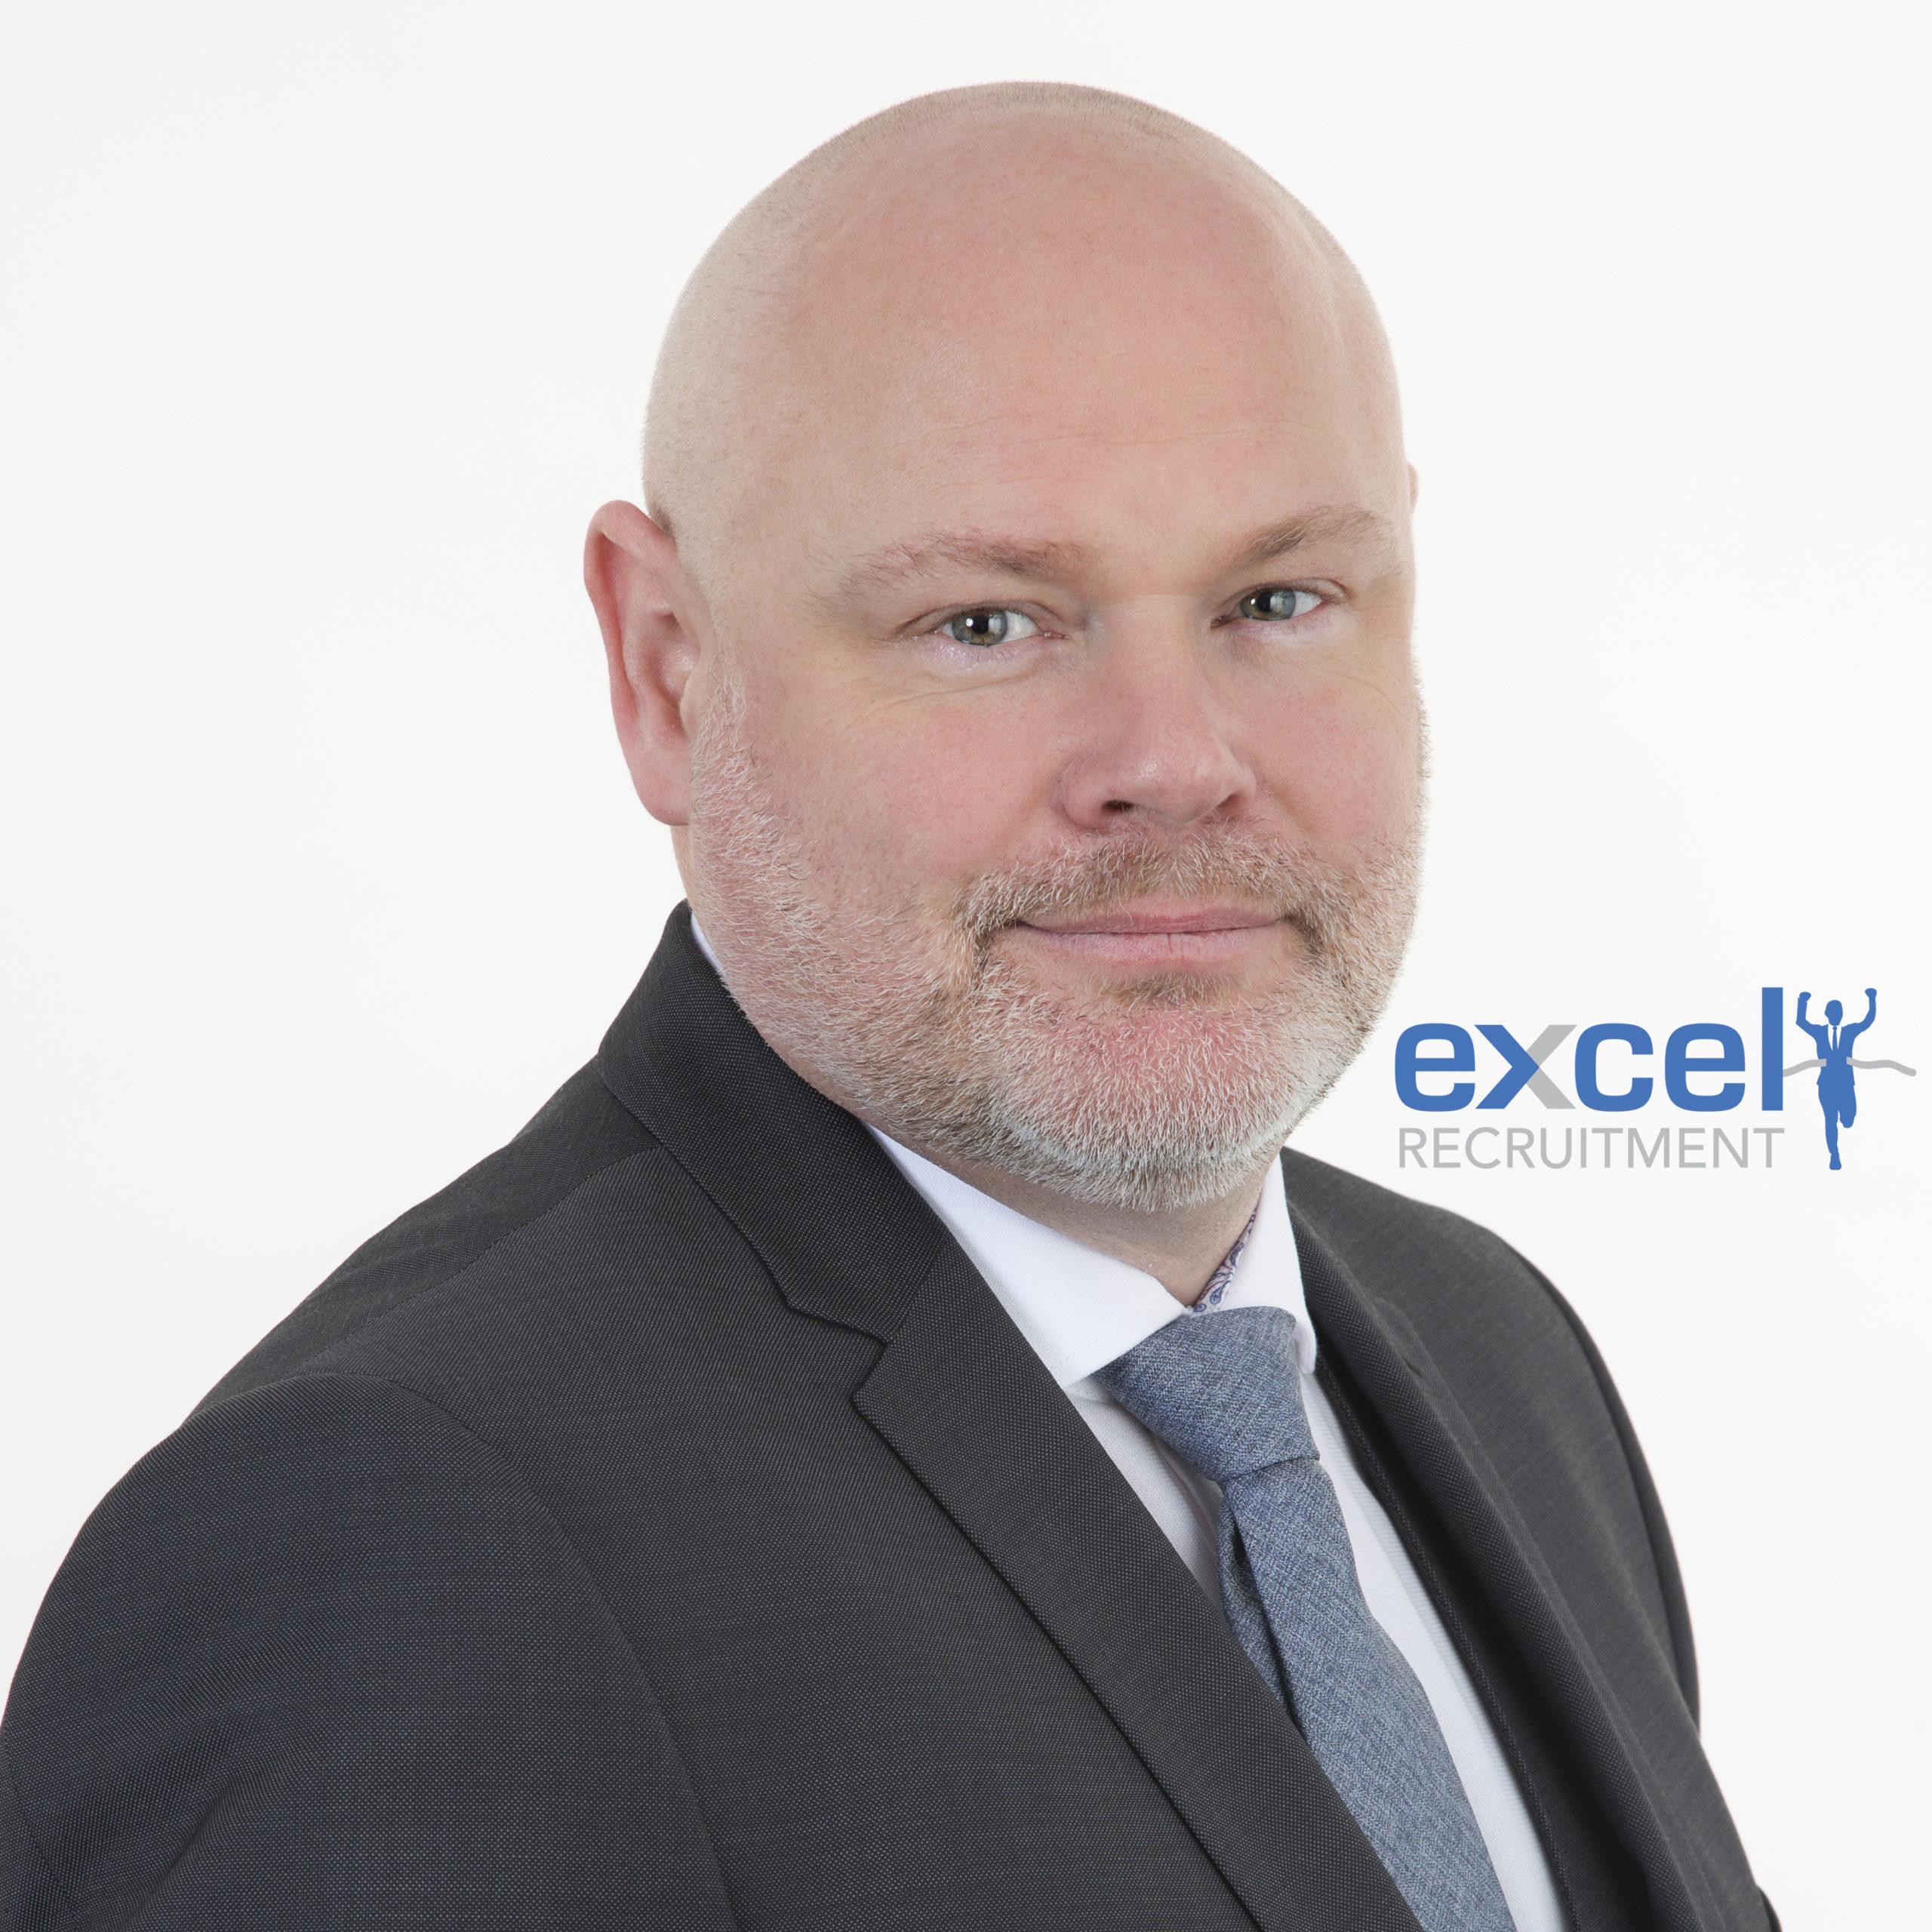 BARRY WHELAN, CEO OF EXCEL RECRUITMENT